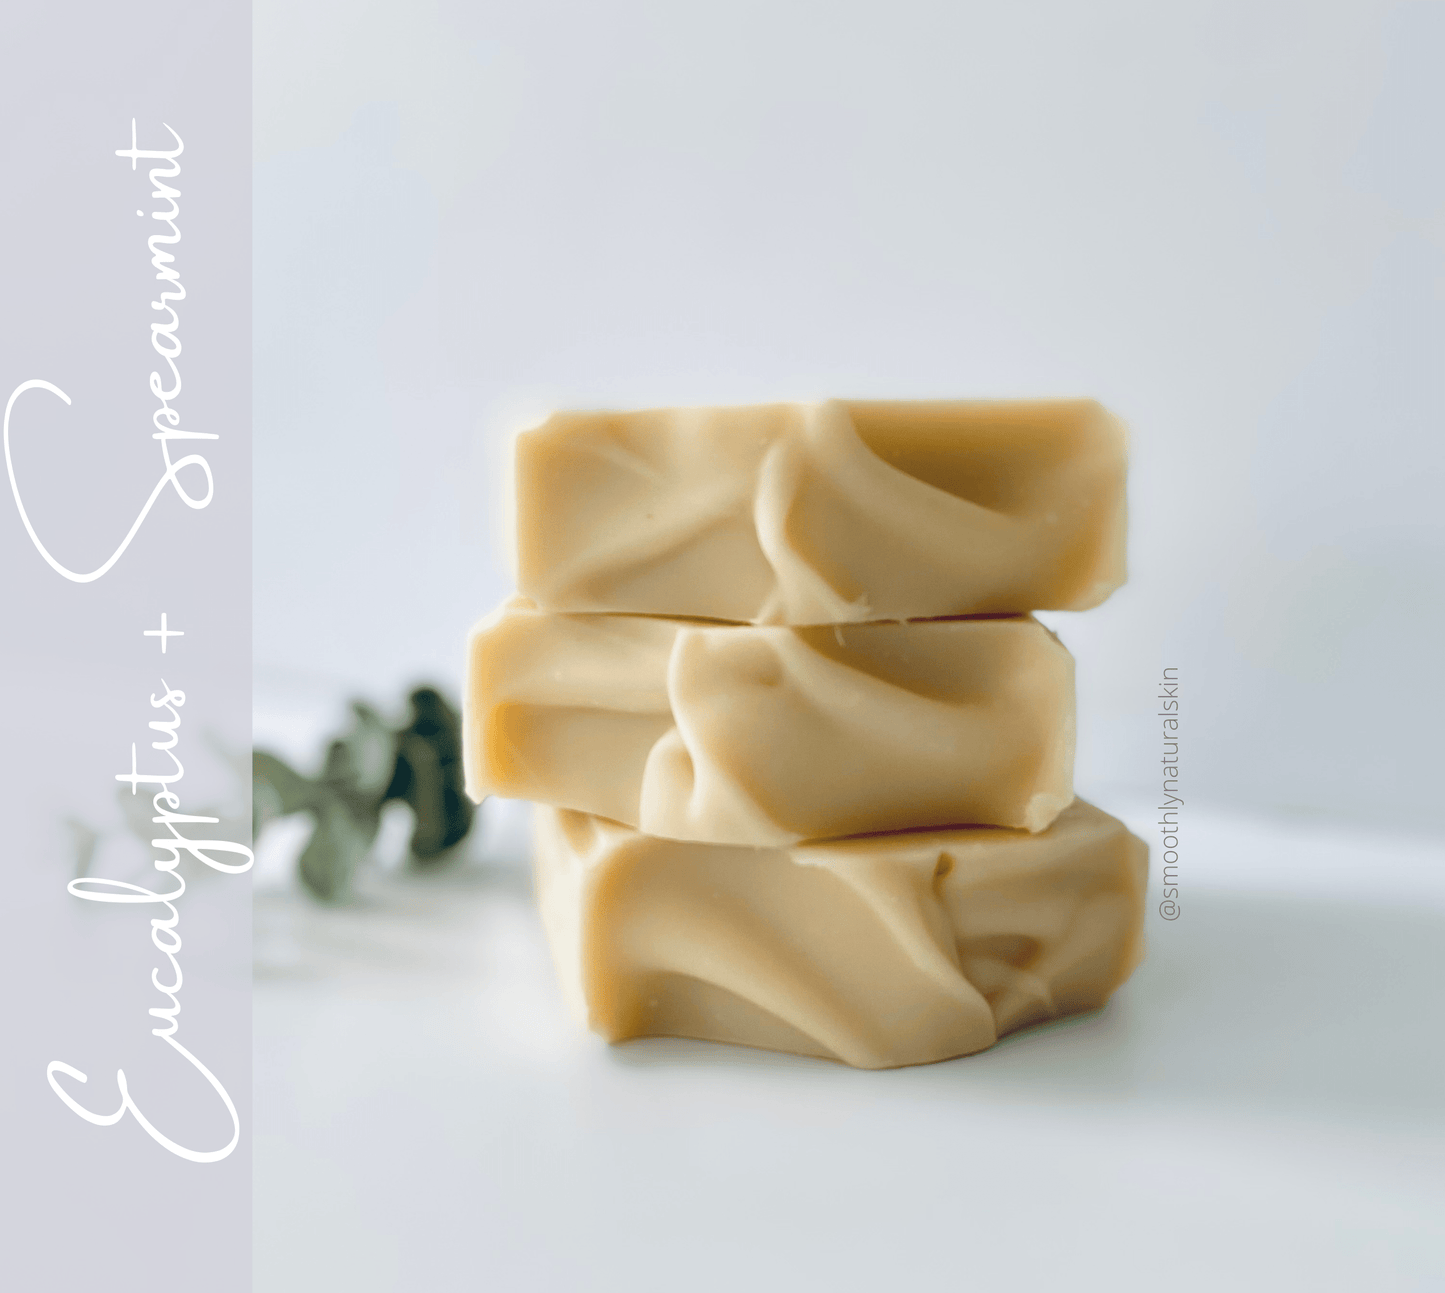 Eucalyptus Spearmint Aloe Vera & Oatmeal bar soaps are made in small batches using the cold process method. To elaborate this soap bar, we are using Aloe Vera, nourishing butters and conditioning oils.